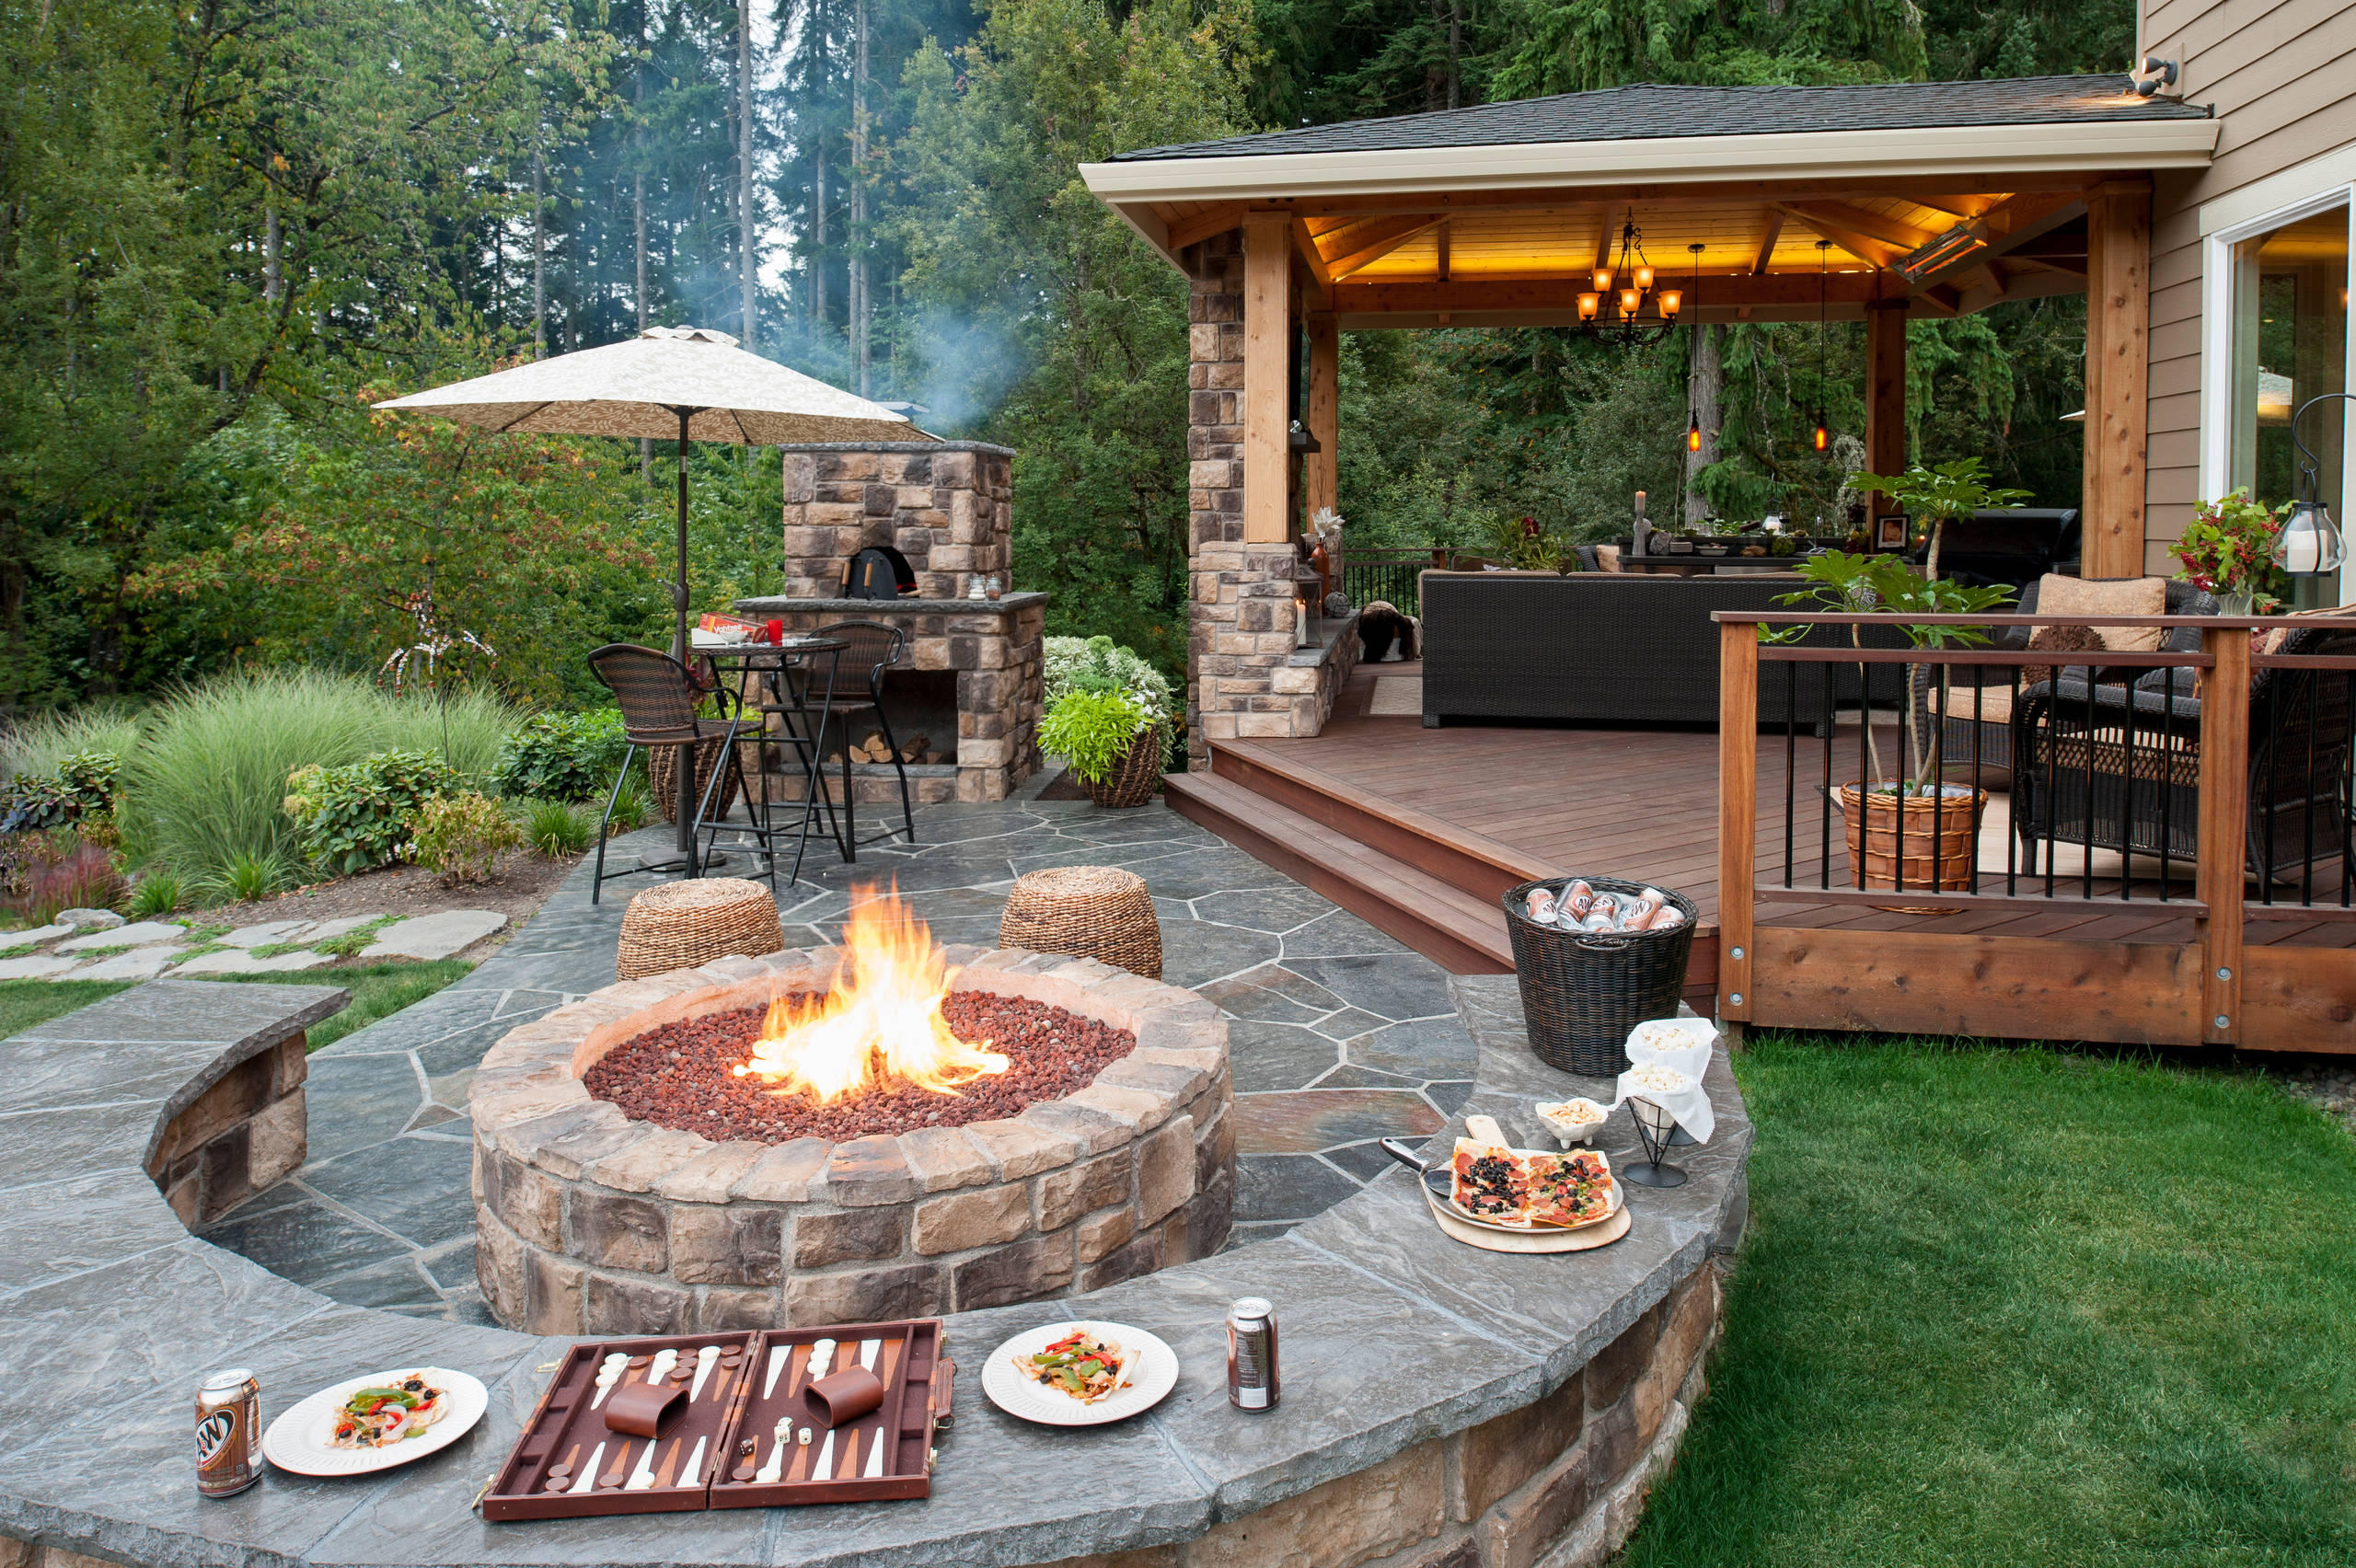 75 Traditional Patio Ideas You'll Love - June, 2022 | Houzz